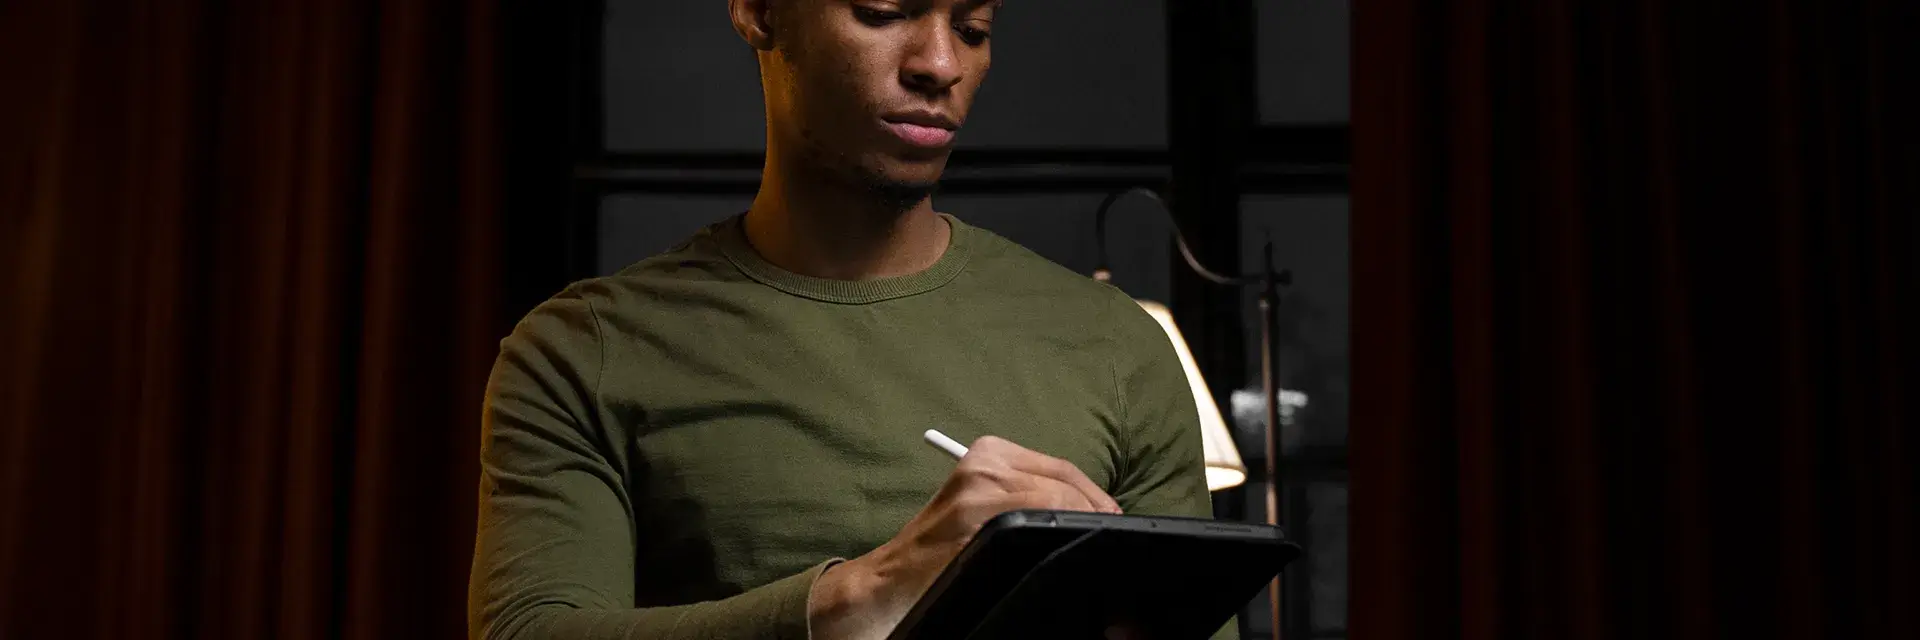 Man performing an audit on a tablet device